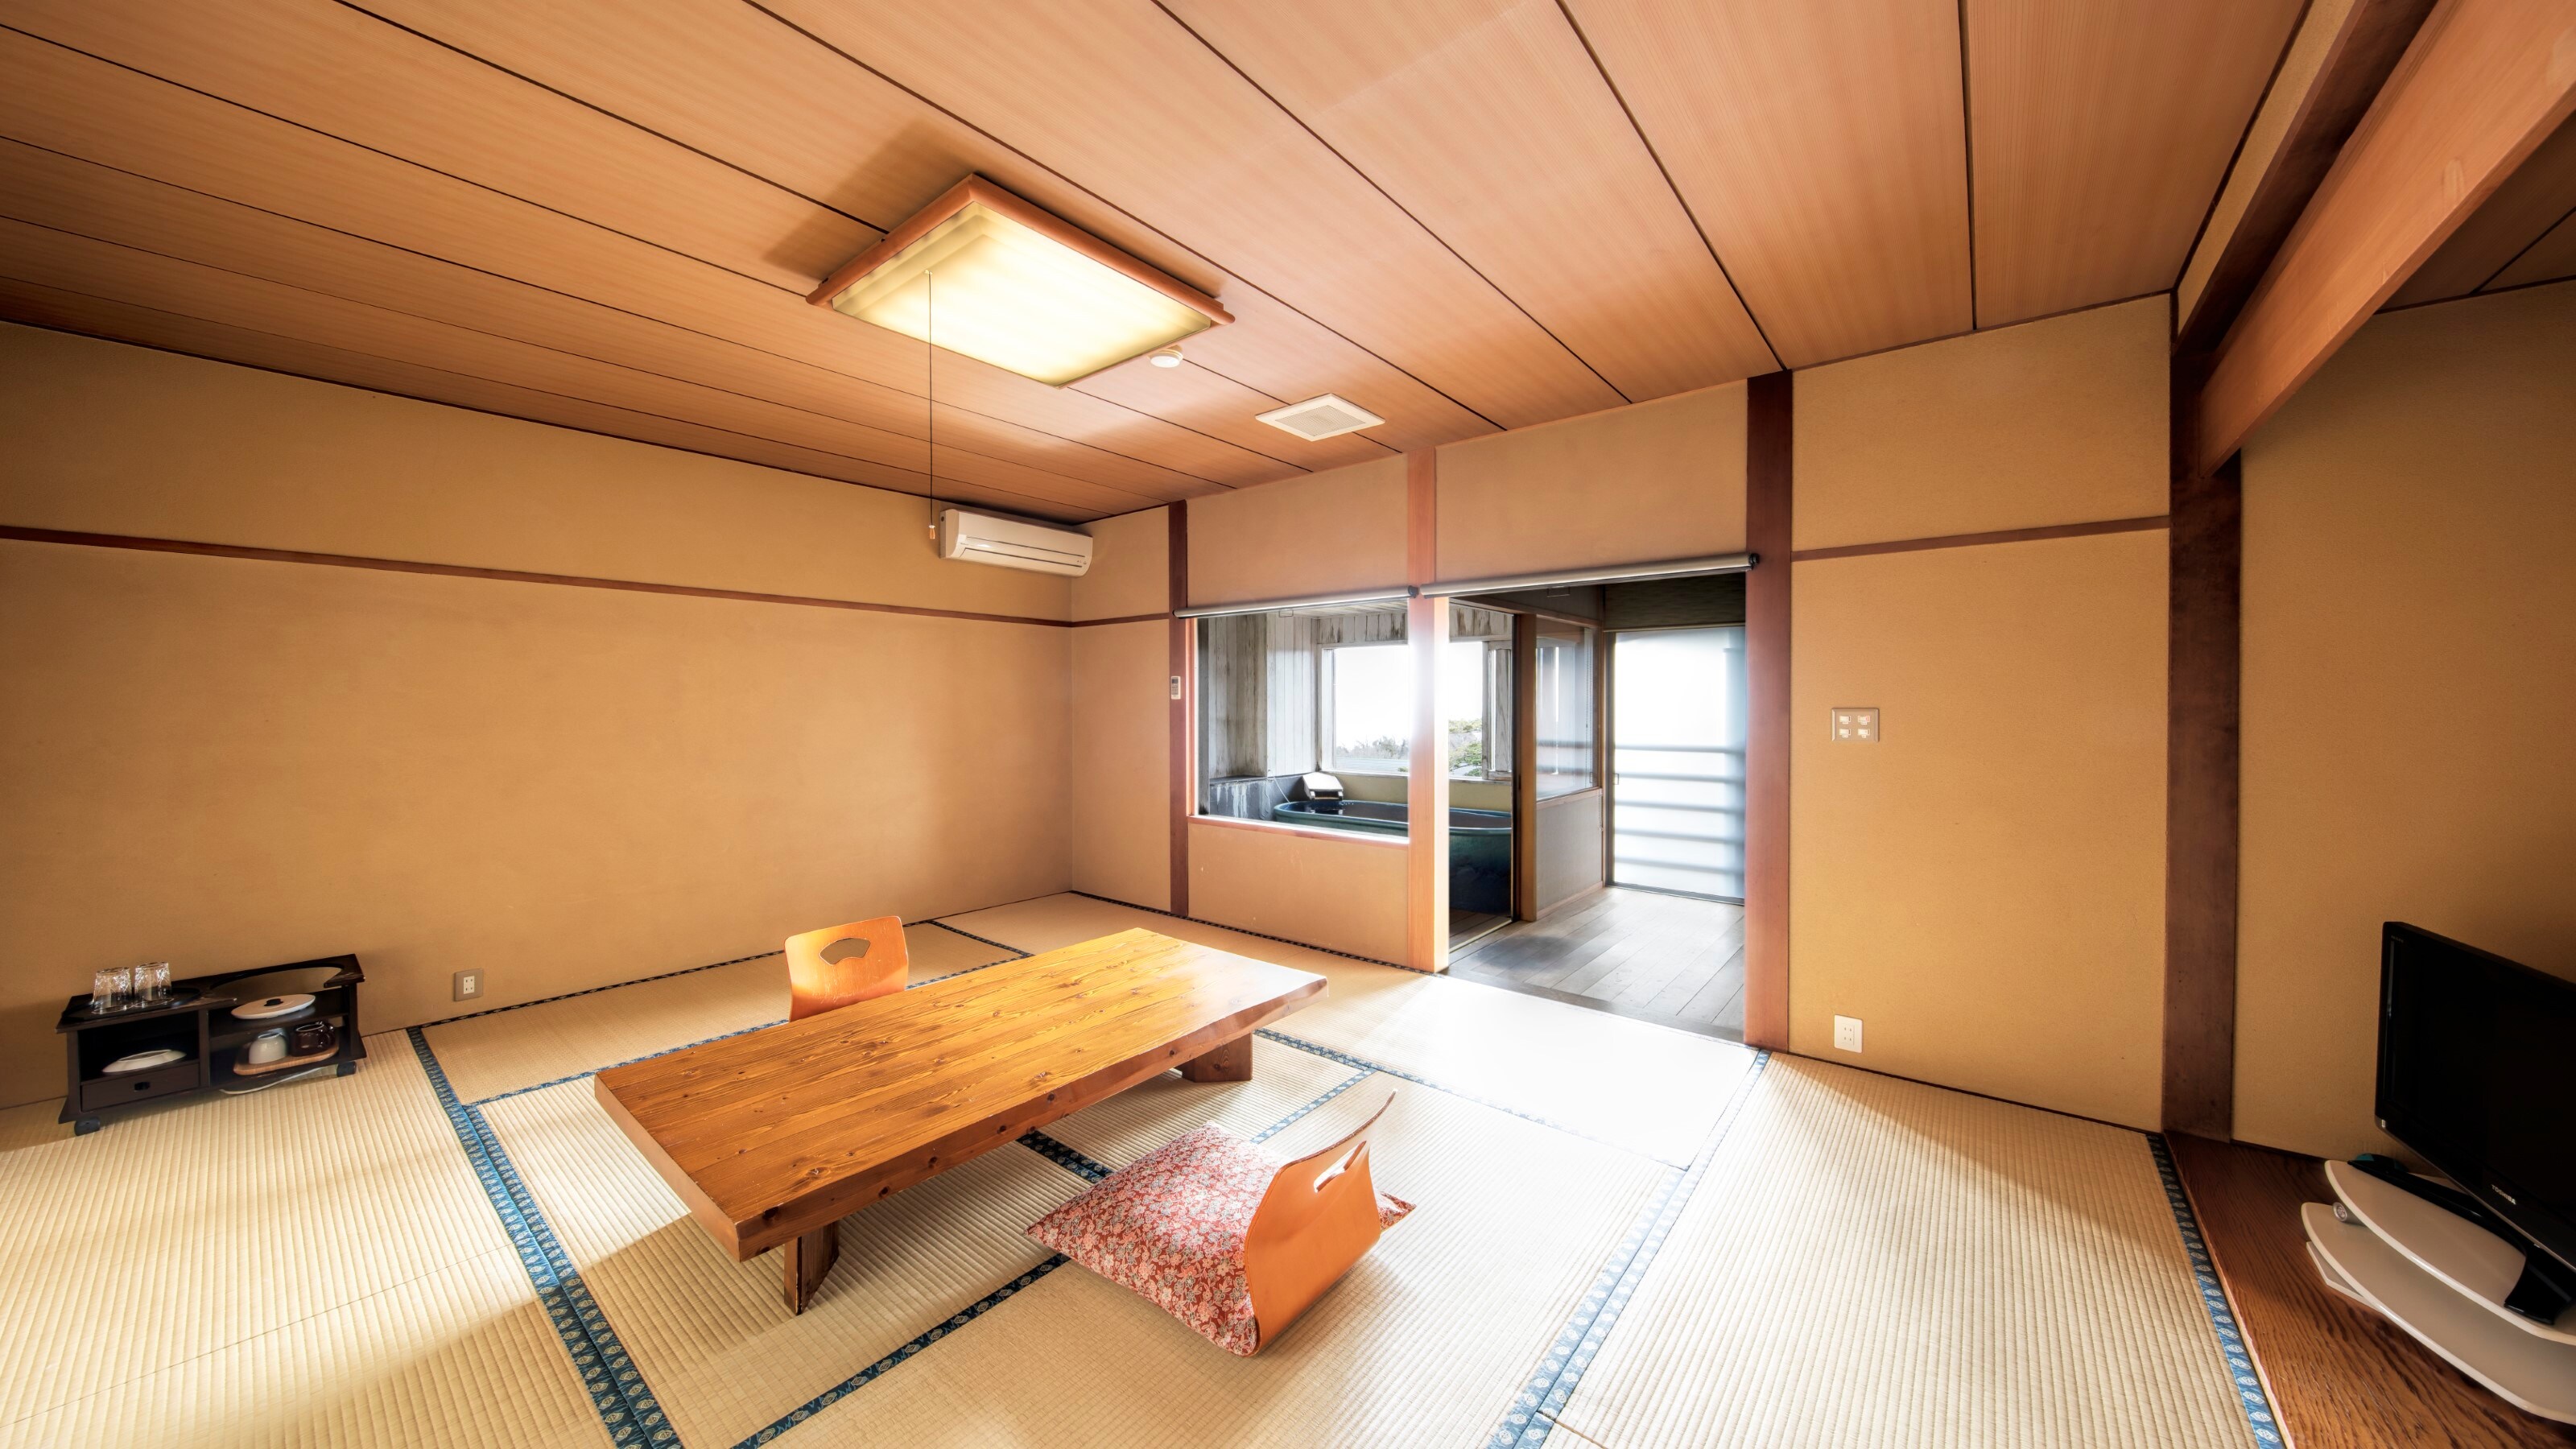 Japanese-style room with 8 tatami mats, with open-air bath, smoking room, small room